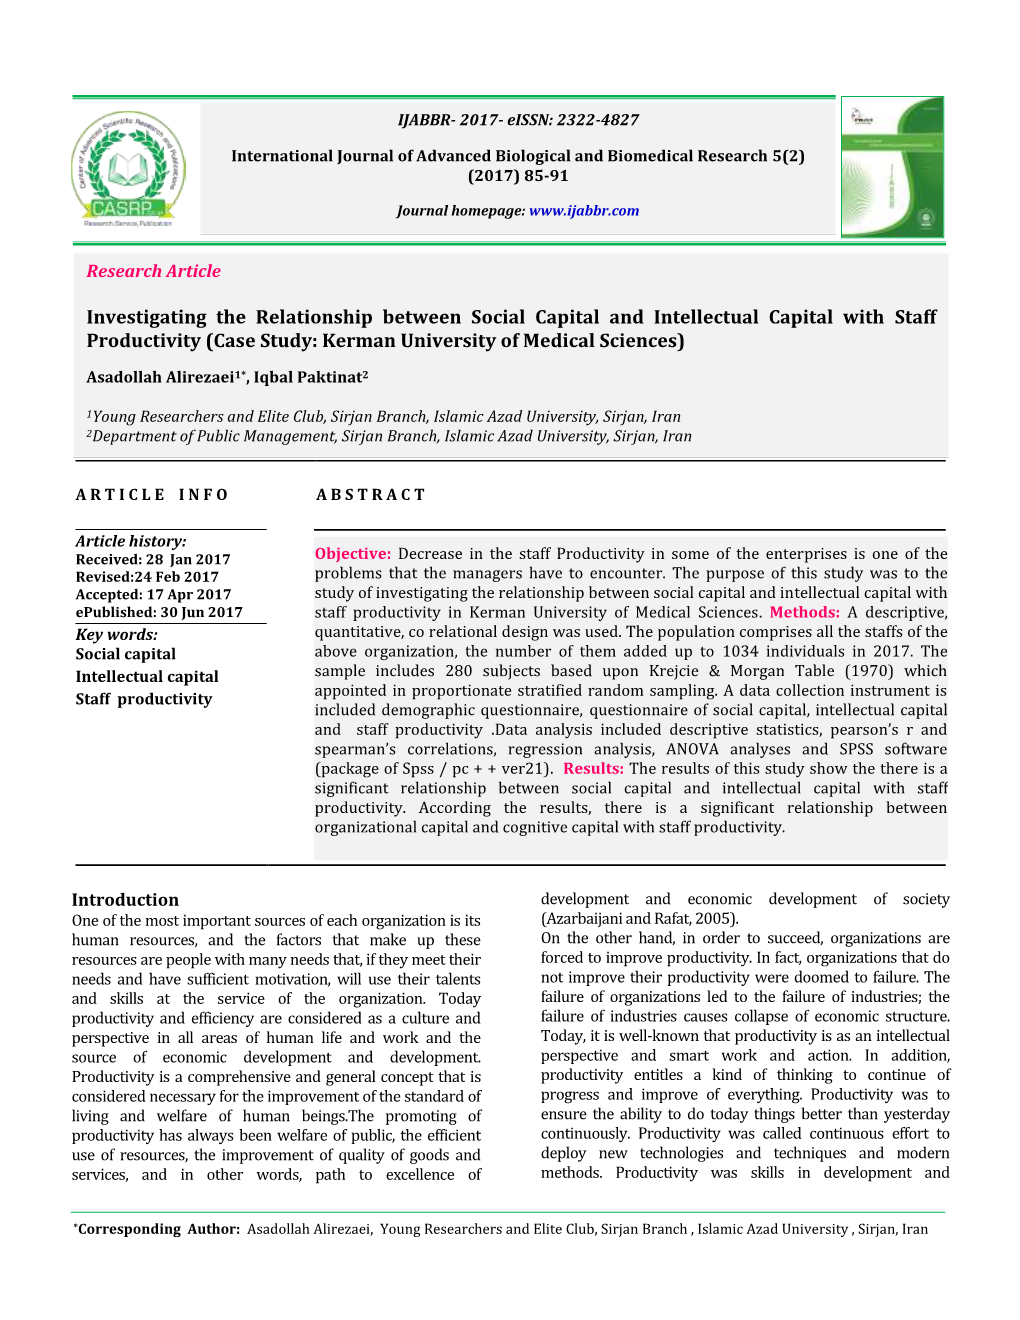 Investigating the Relationship Between Social Capital and Intellectual Capital with Staff Productivity (Case Study: Kerman University of Medical Sciences)